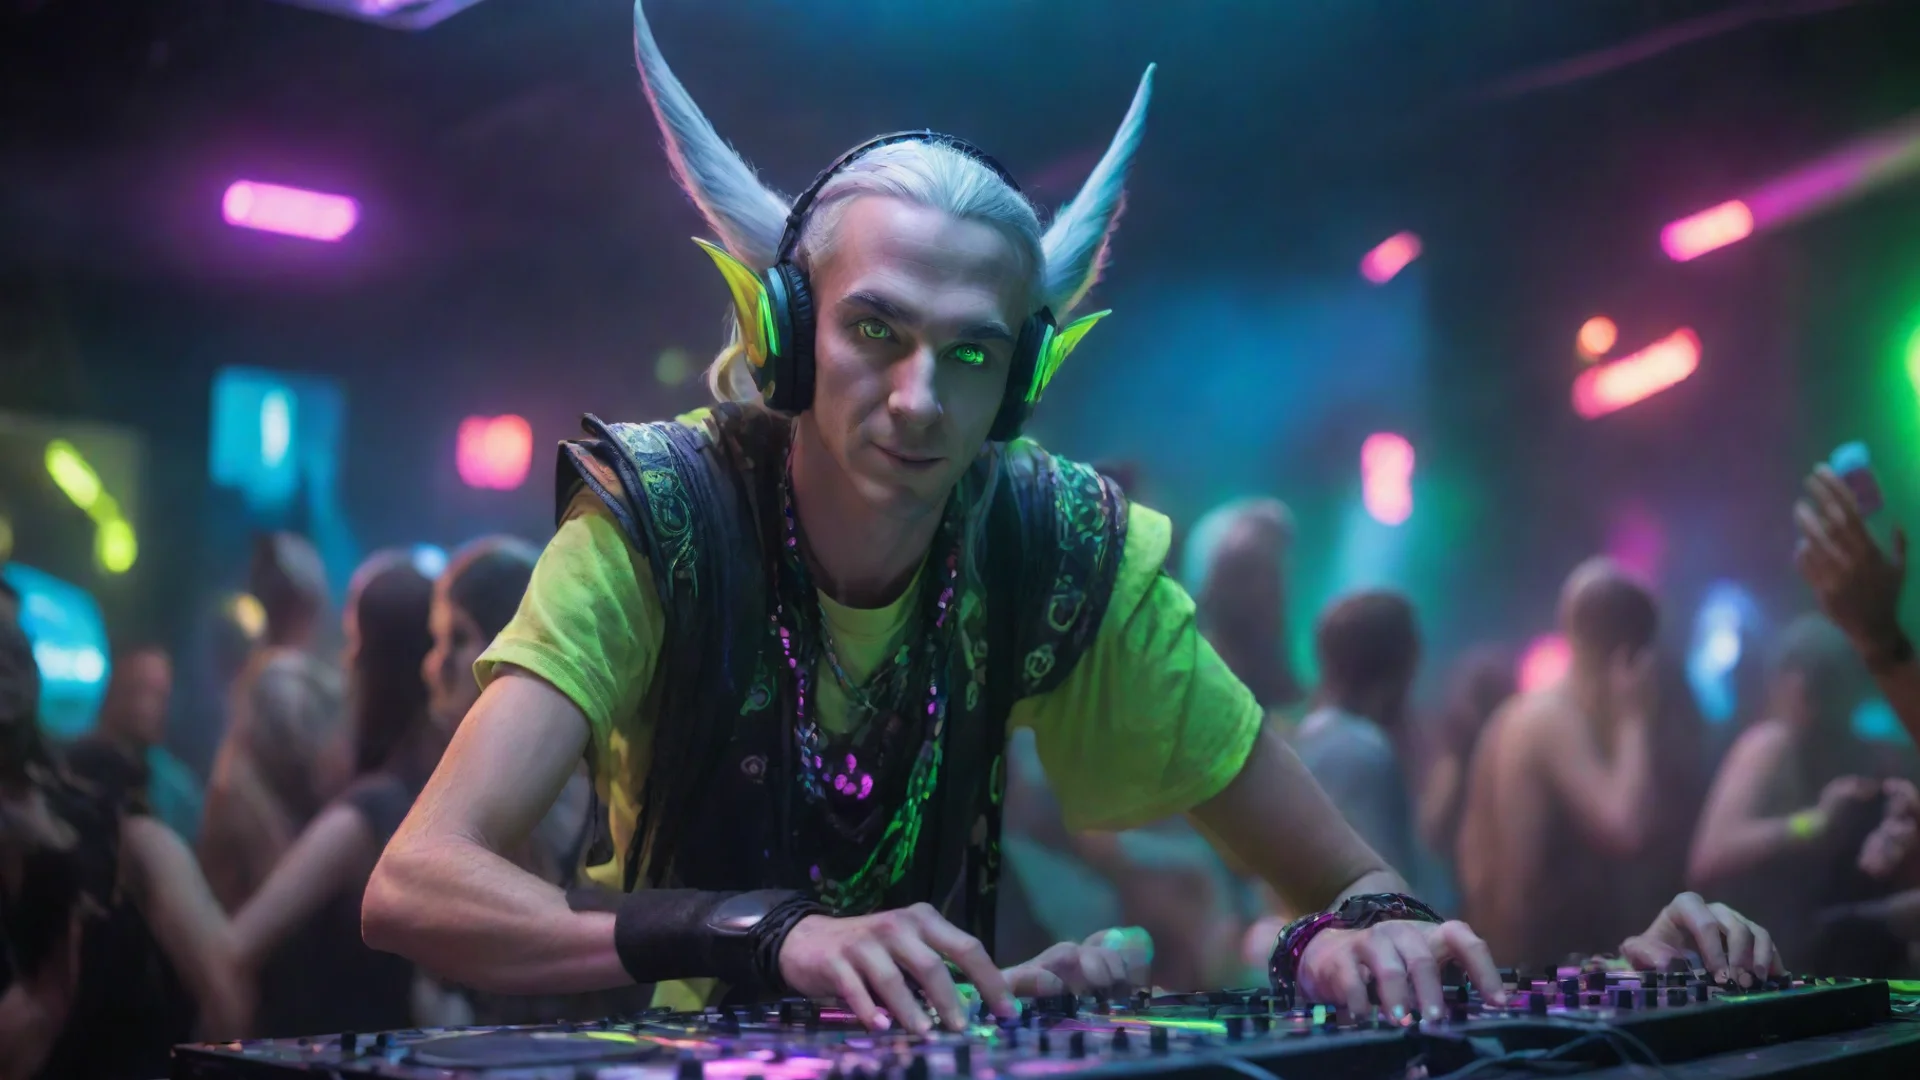 amazing high elf dj at a rave with lots of fluorescent elements awesome portrait 2 wide